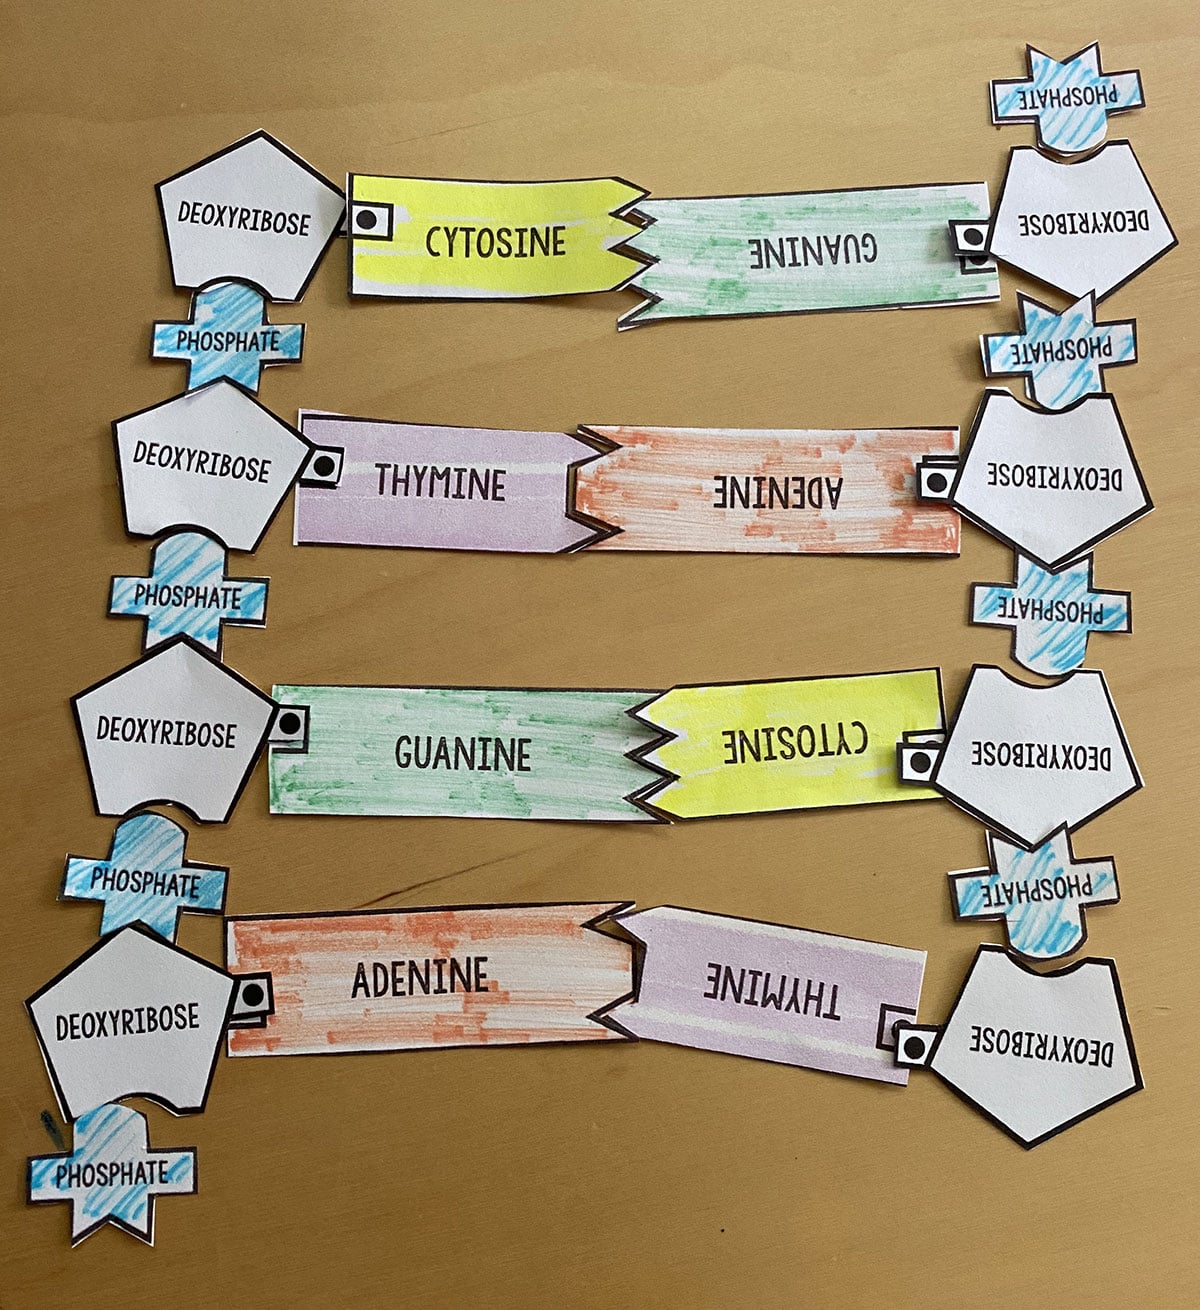 A paper model displays the chained connections of phosphate, deoxyribose, adenine, thymine, cytosine, and guanine